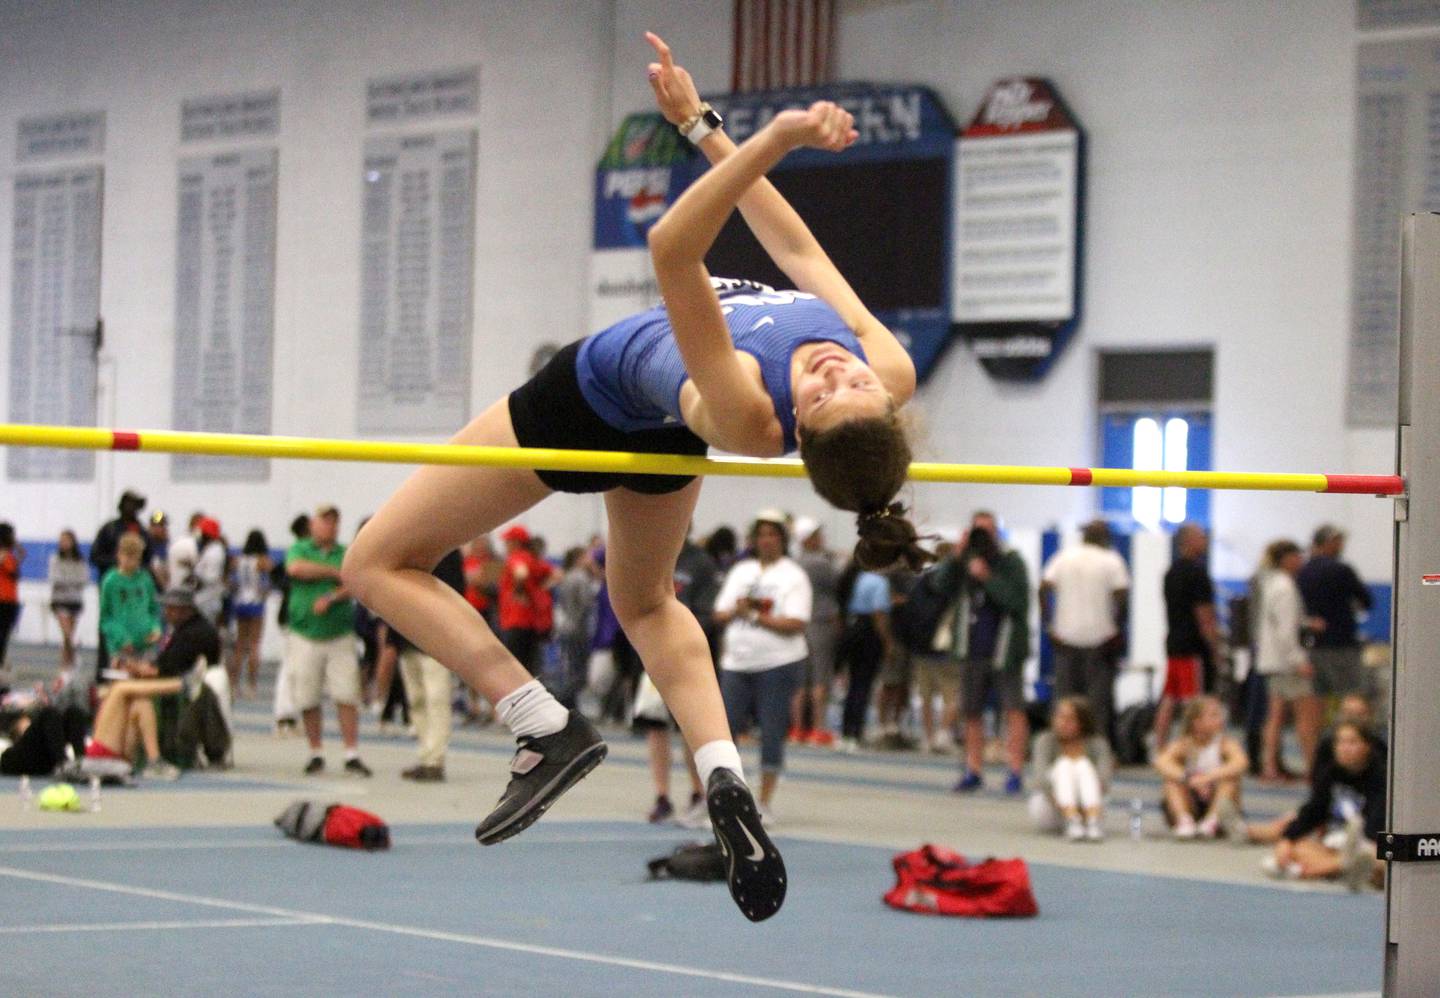 Natalie Buratczuk of St. Charles North competes in the 3A high jump finals during the IHSA Girls State Championships in Charleston on Saturday, May 21, 2022.